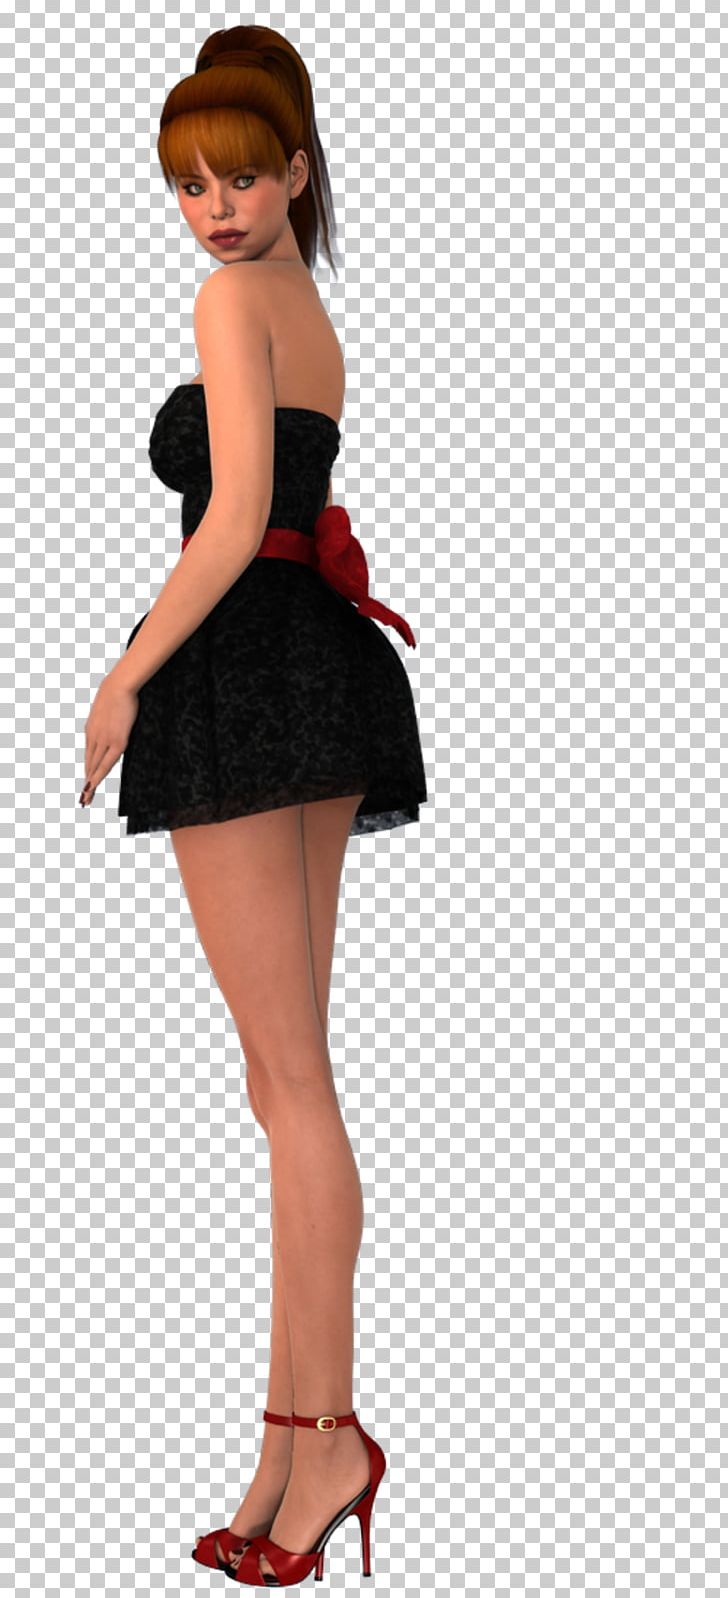 Miniskirt Cocktail Dress Shoulder Pin-up Girl PNG, Clipart, Abdomen, Clothing, Cocktail, Cocktail Dress, Costume Free PNG Download